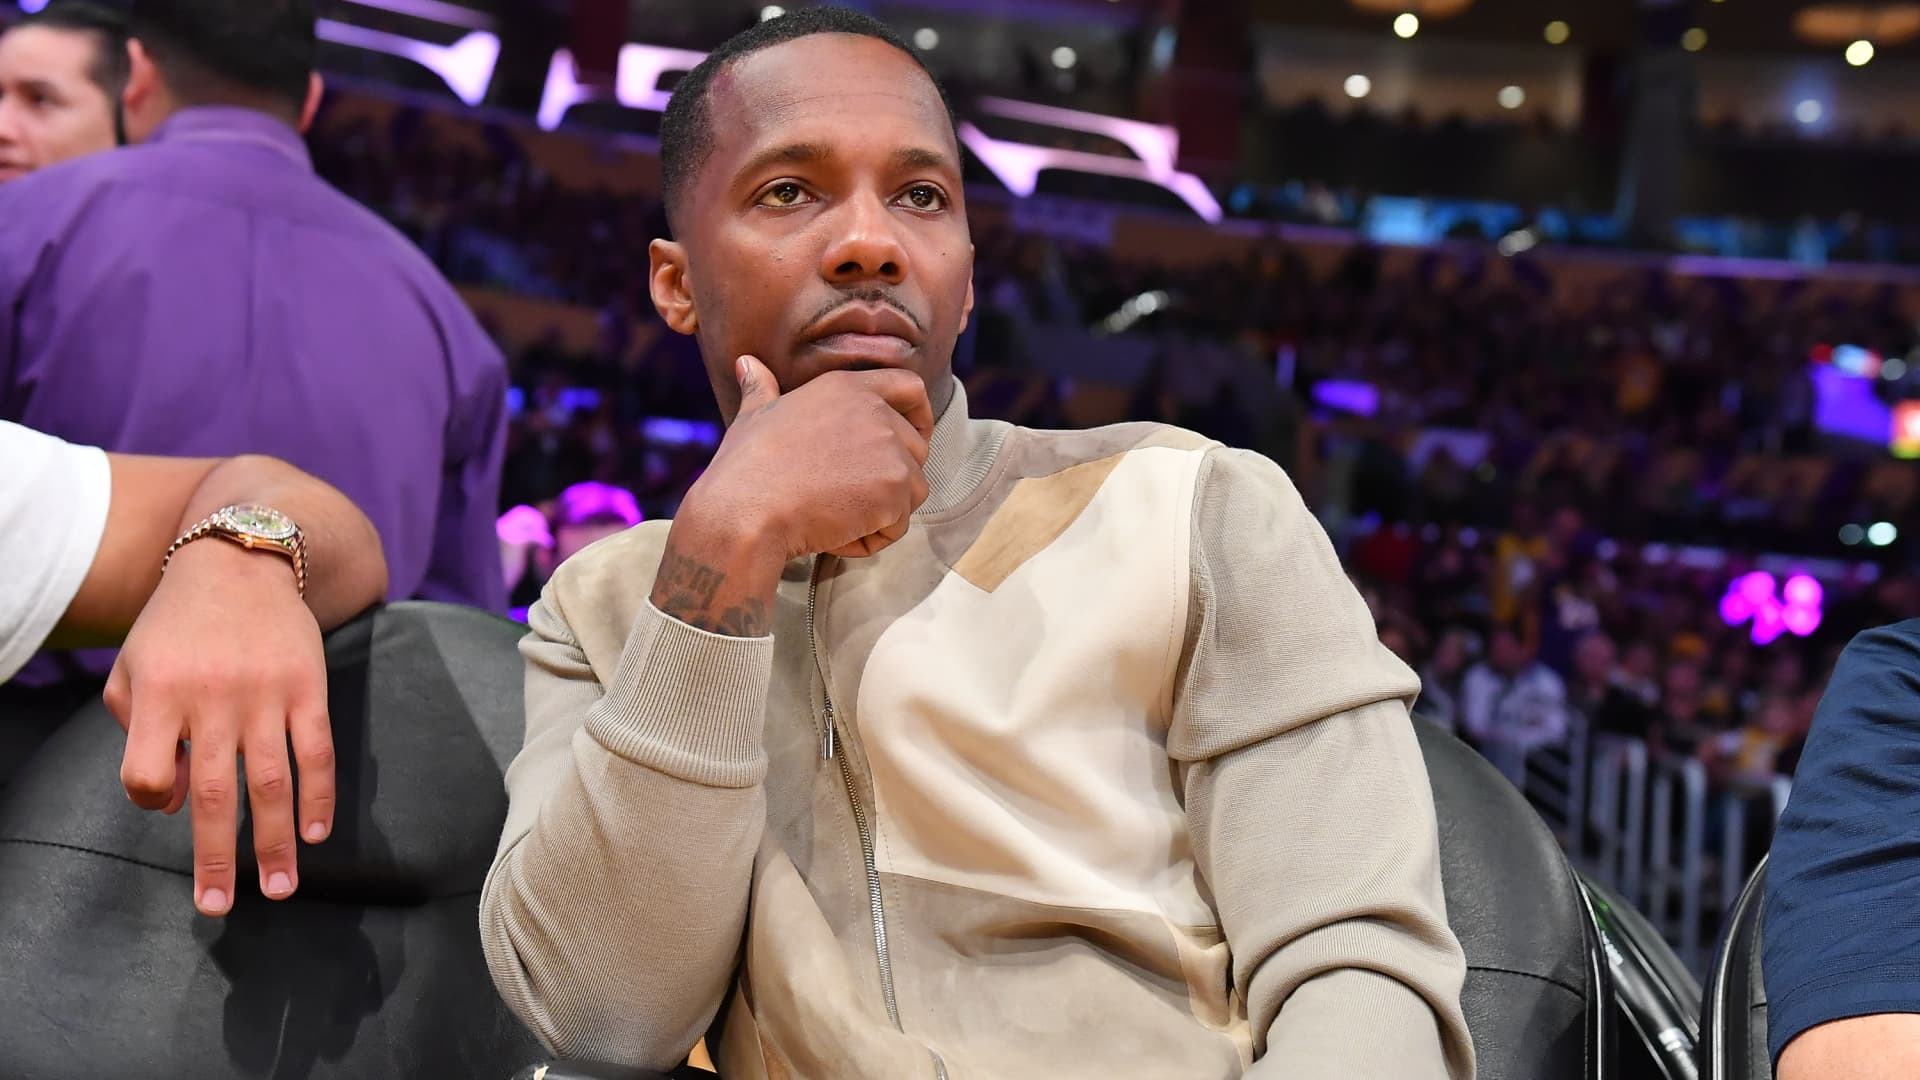 Rich Paul attends a basketball game between the Los Angeles Lakers and the Boston Celtics at Staples Center on February 23, 2020 in Los Angeles, California.